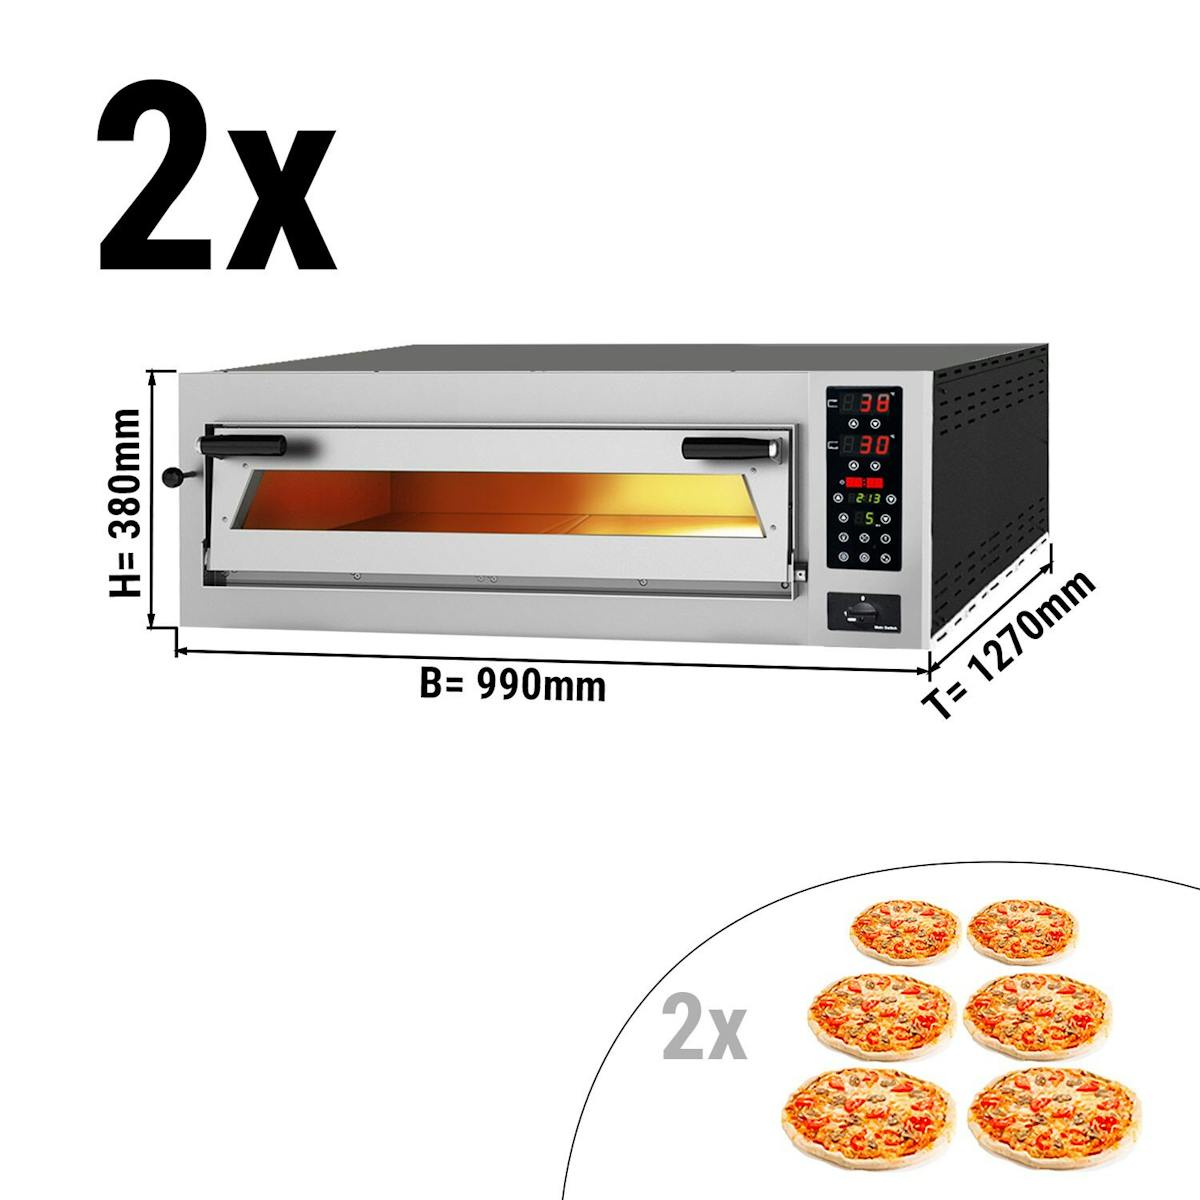 (2 pieces) Pizza oven 6+6x 35 cm - Deep - with TouchScreen